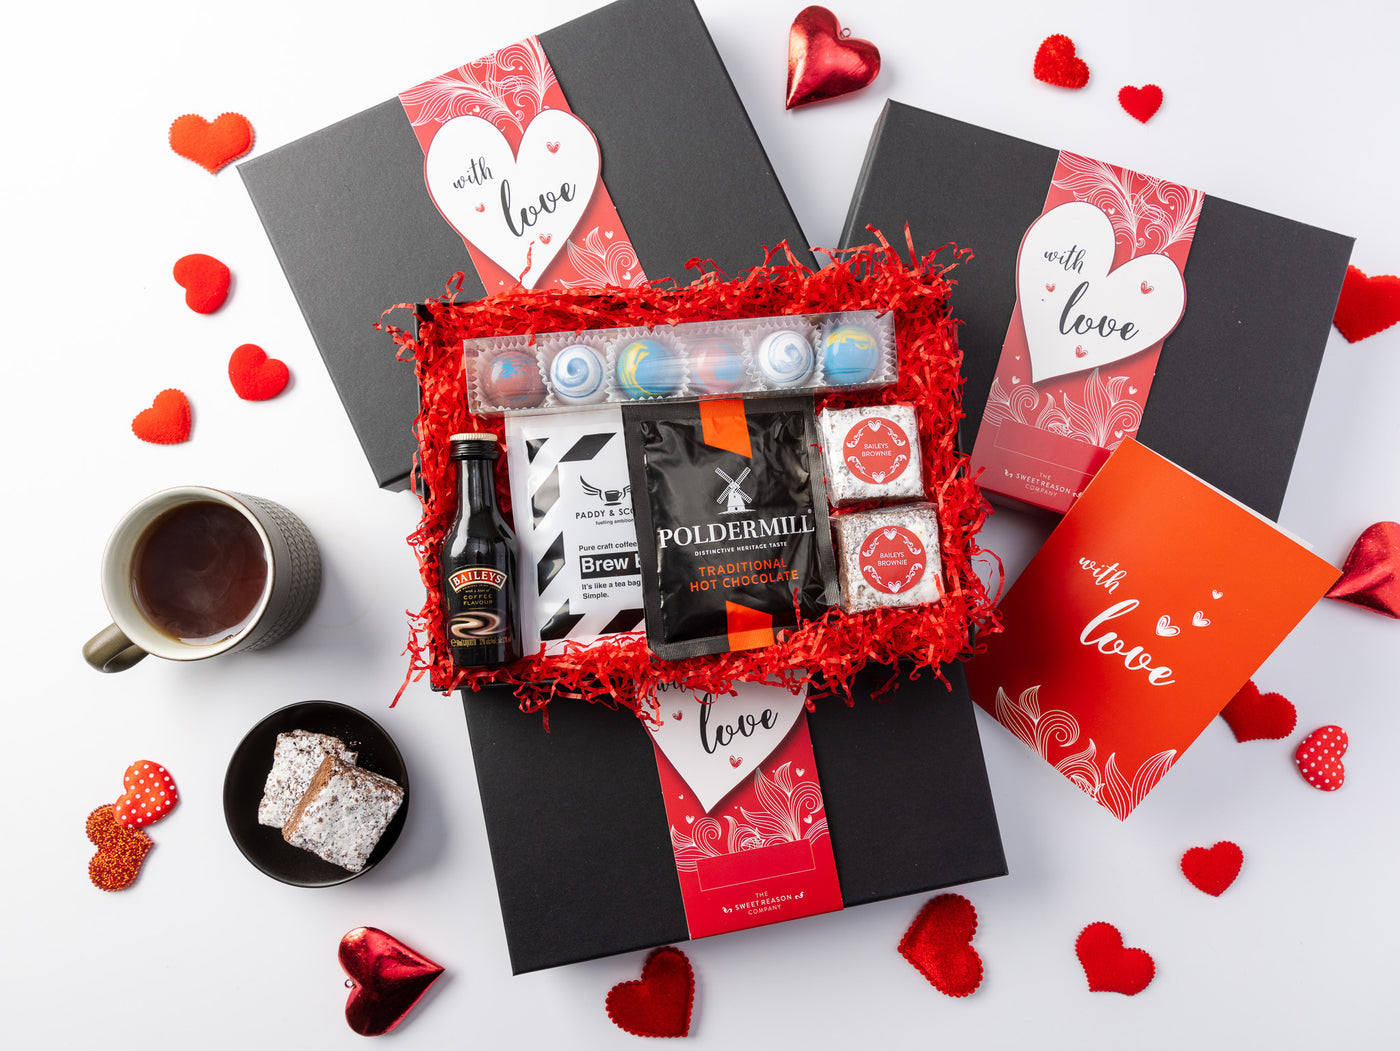 Red Sweet Reason With Love Afternoon Tea Gift Boxes Surrounded By Tea & Brownies 